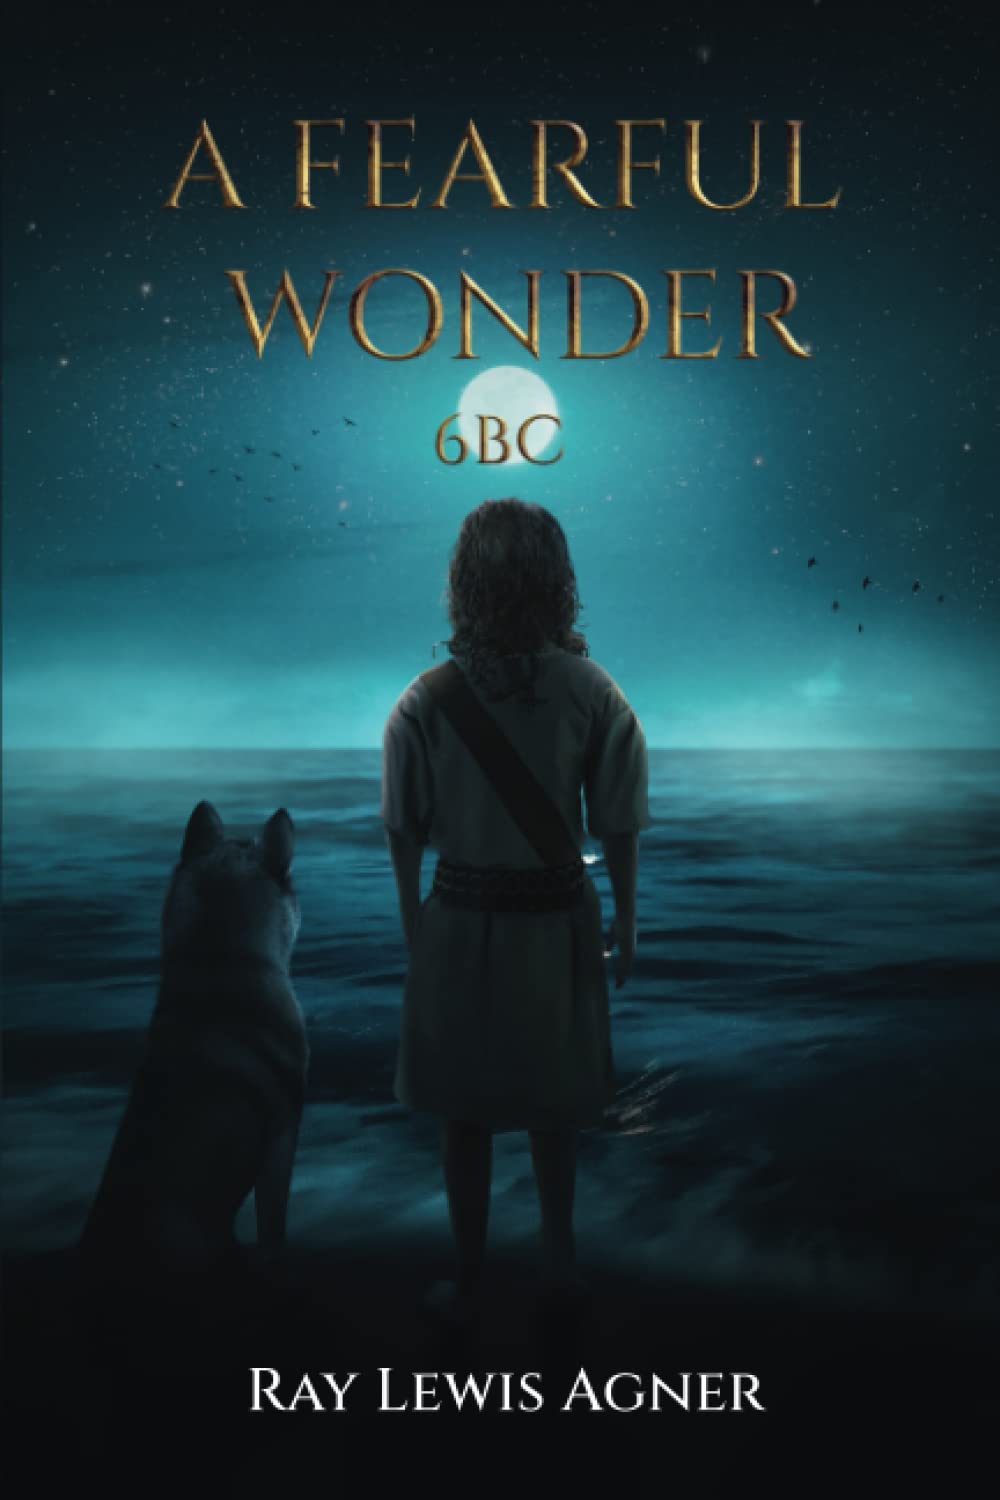 A Fearful Wonder: 6 BC by Ray Lewis Agner